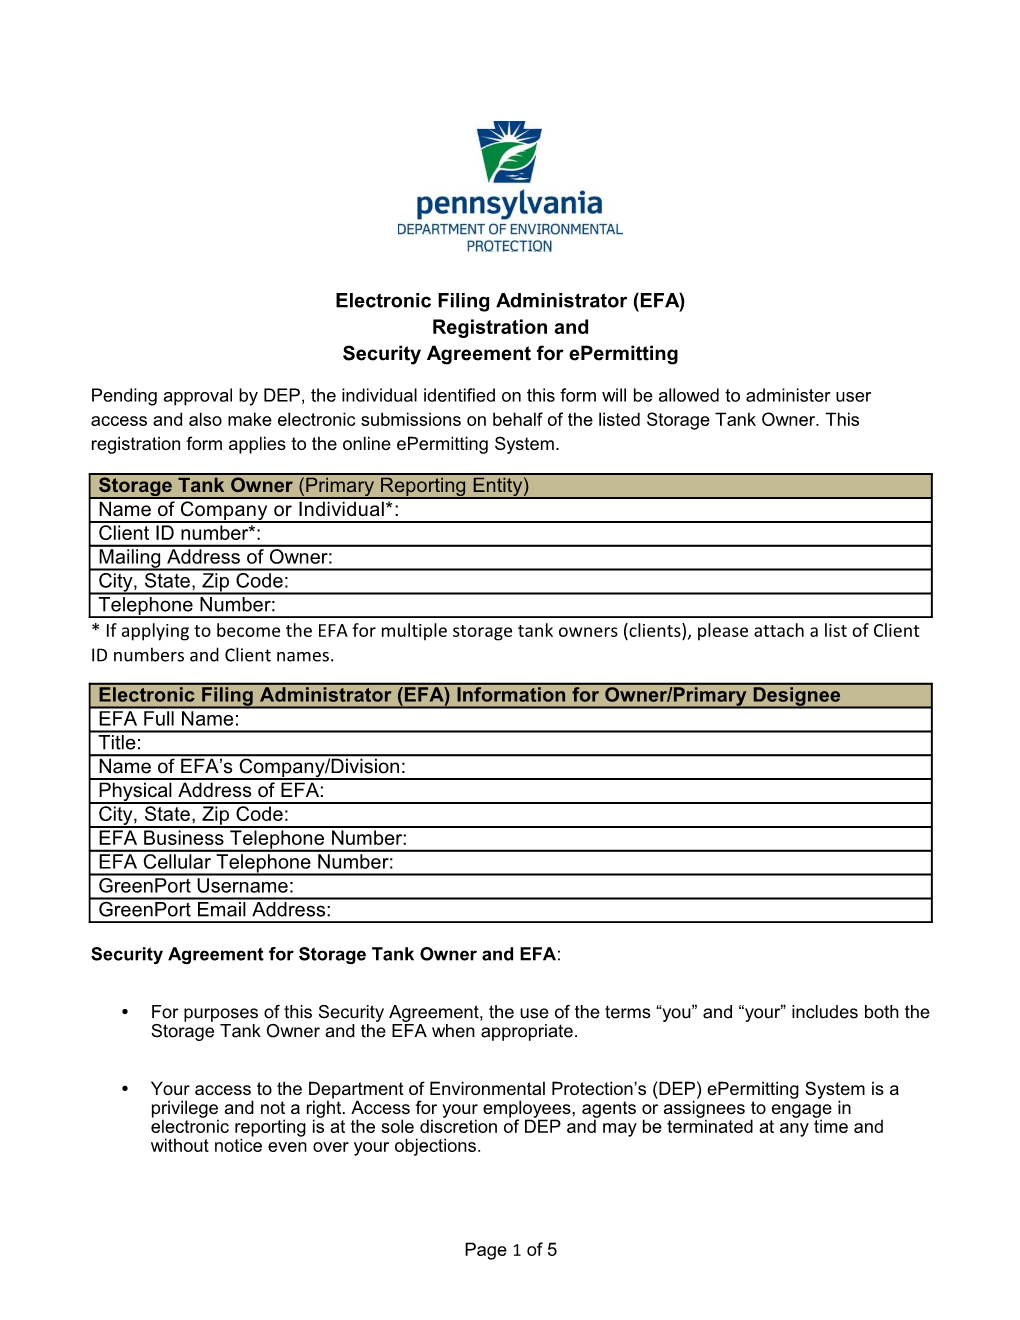 Electronic Filing Administrator (EFA) Registration and Security Agreement for Epermitting